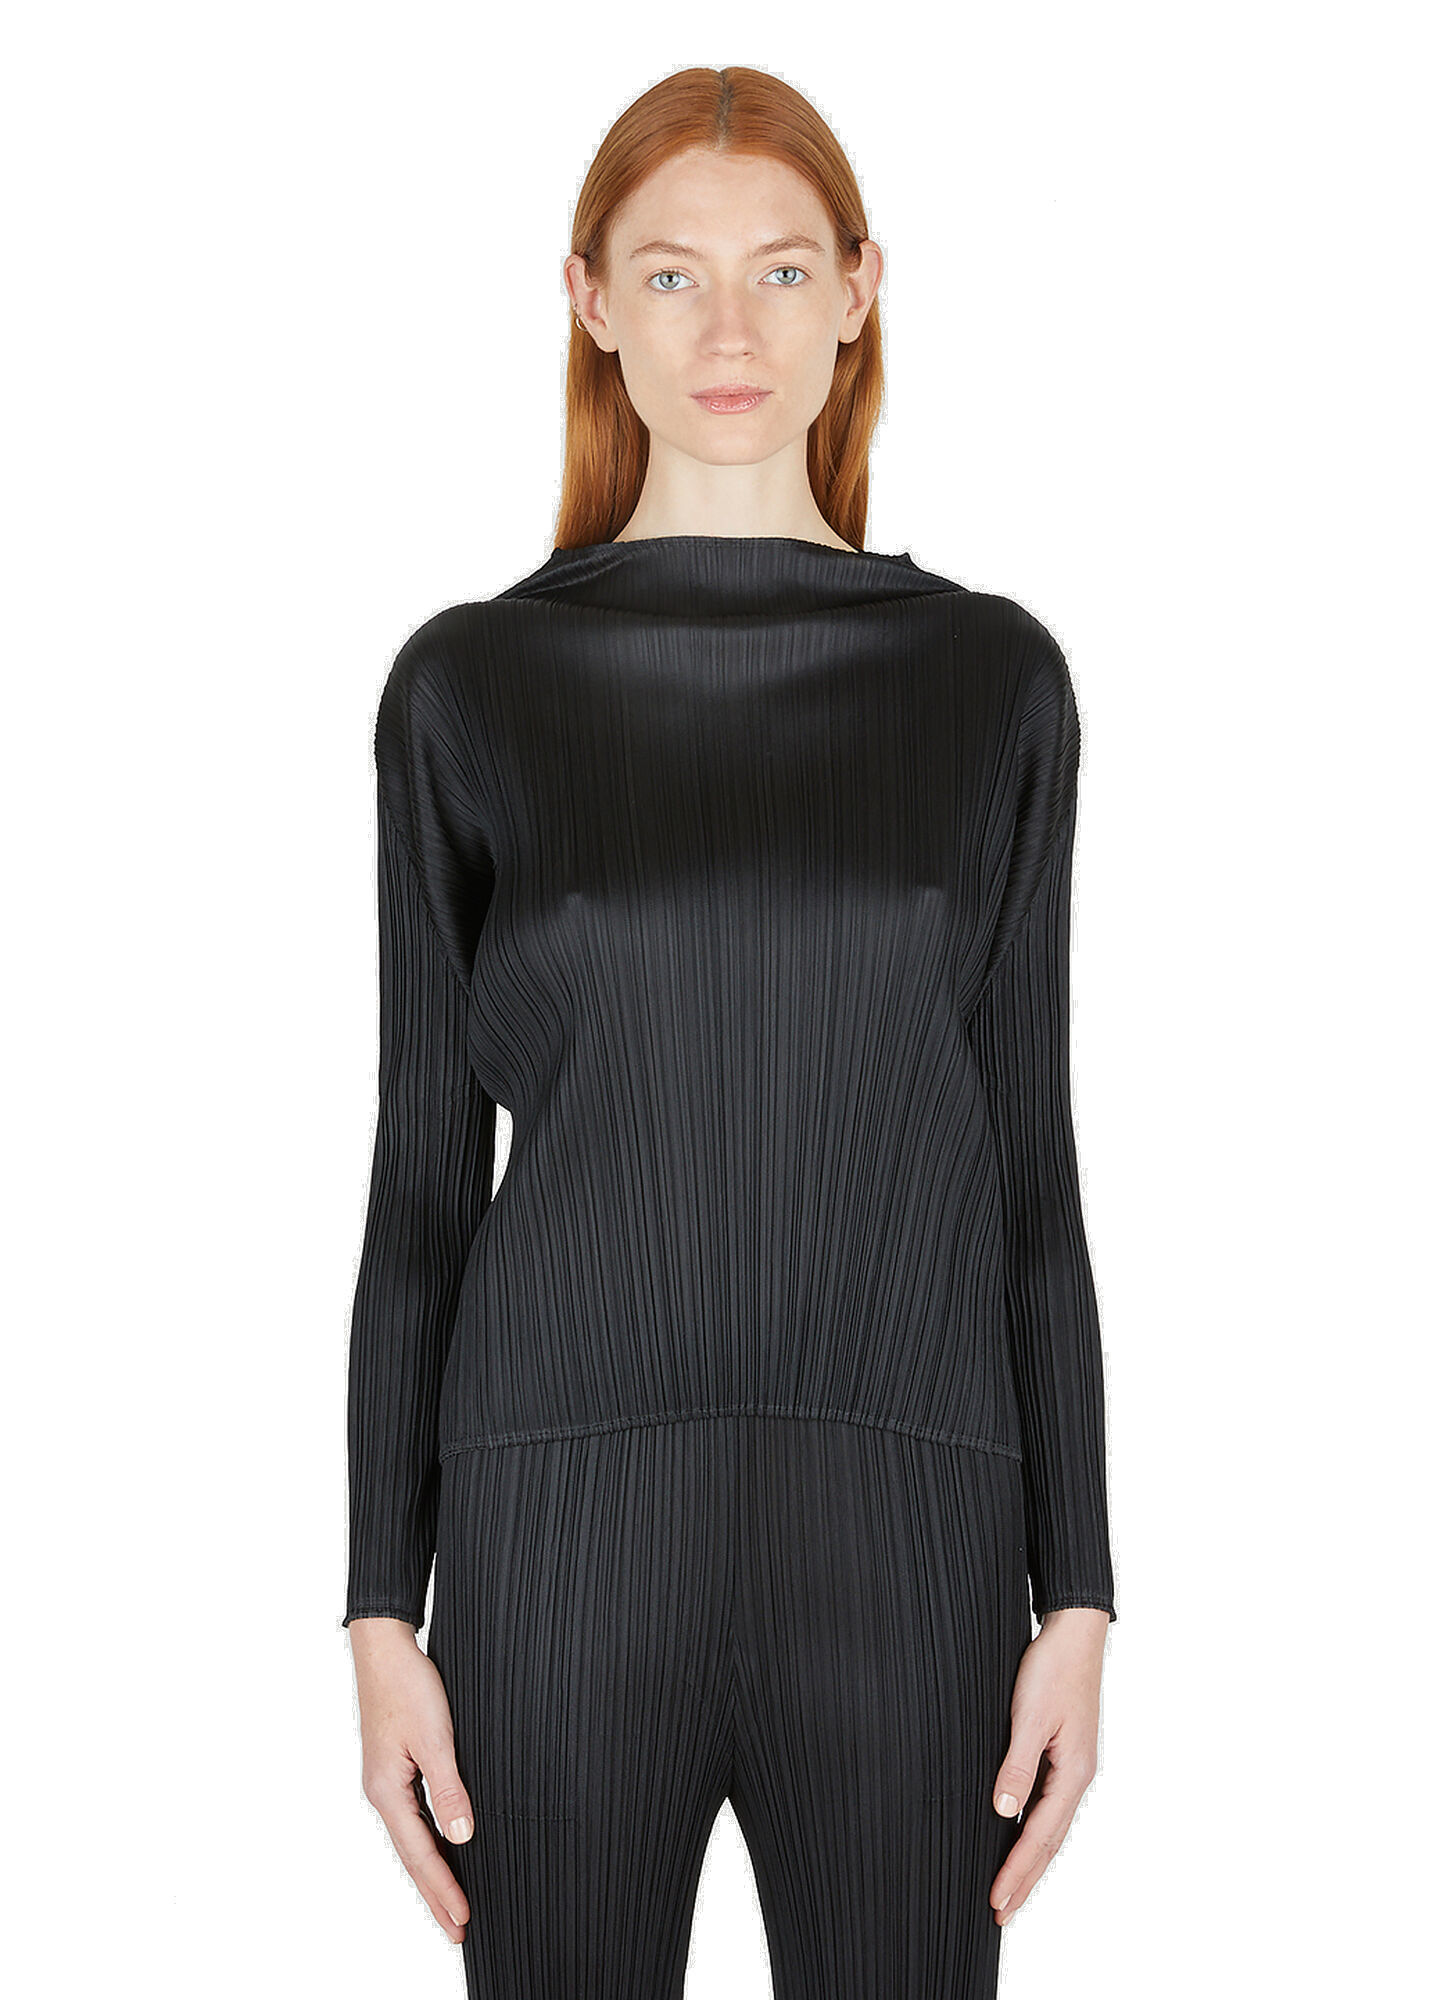 High Neck Top in Black Pleats Please Issey Miyake